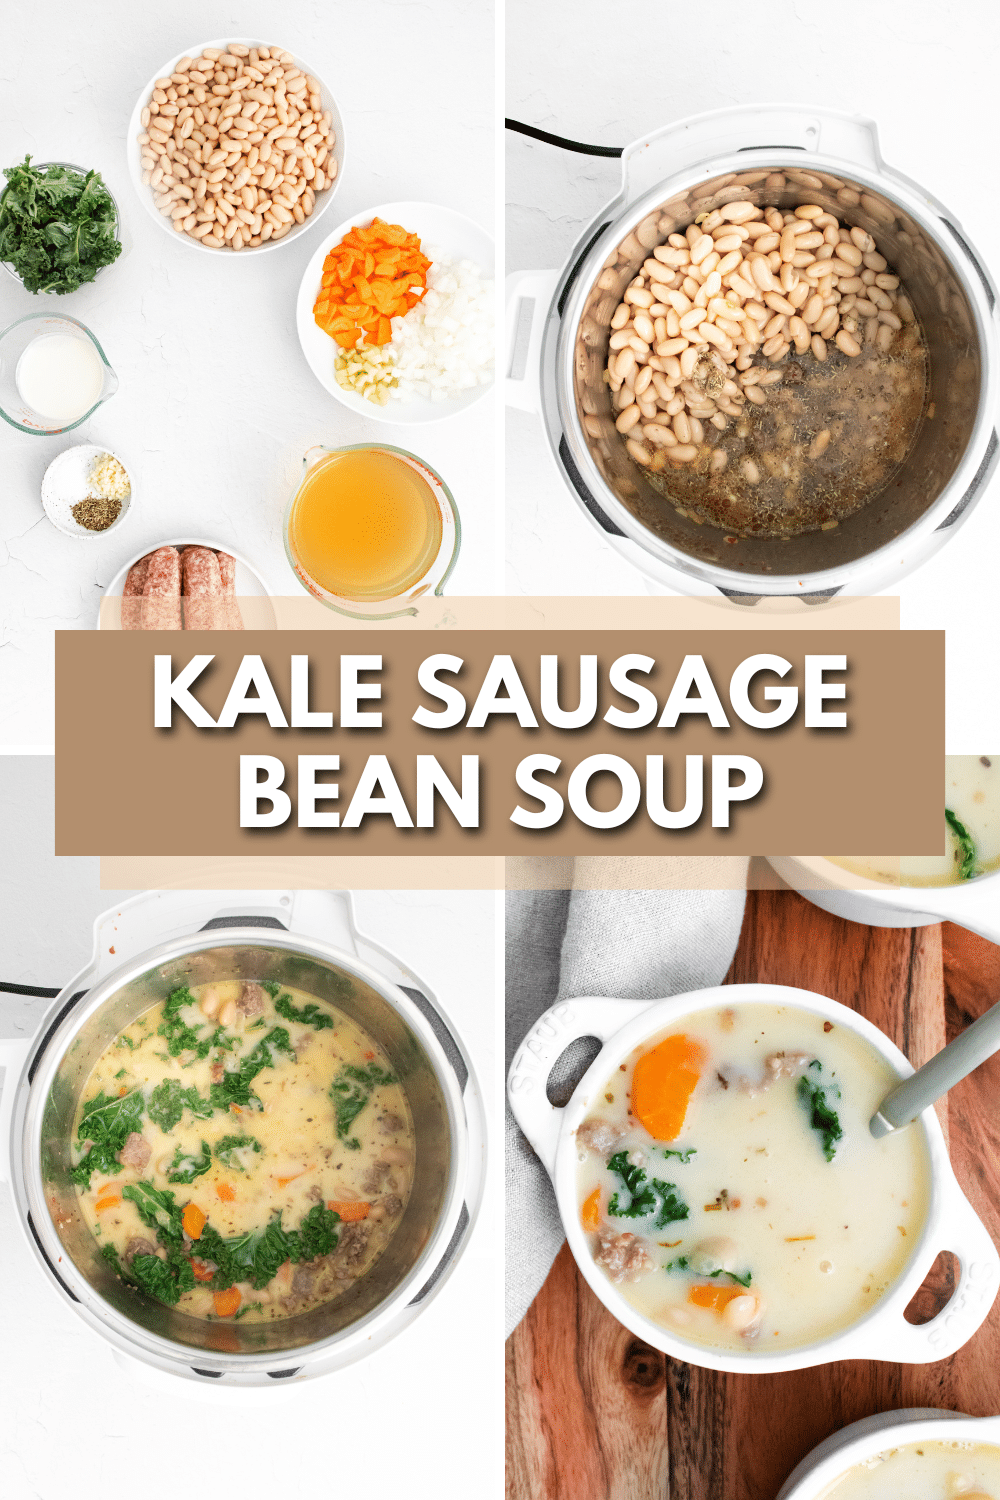 Sausage bean soup with kale made quickly in an instant pot.